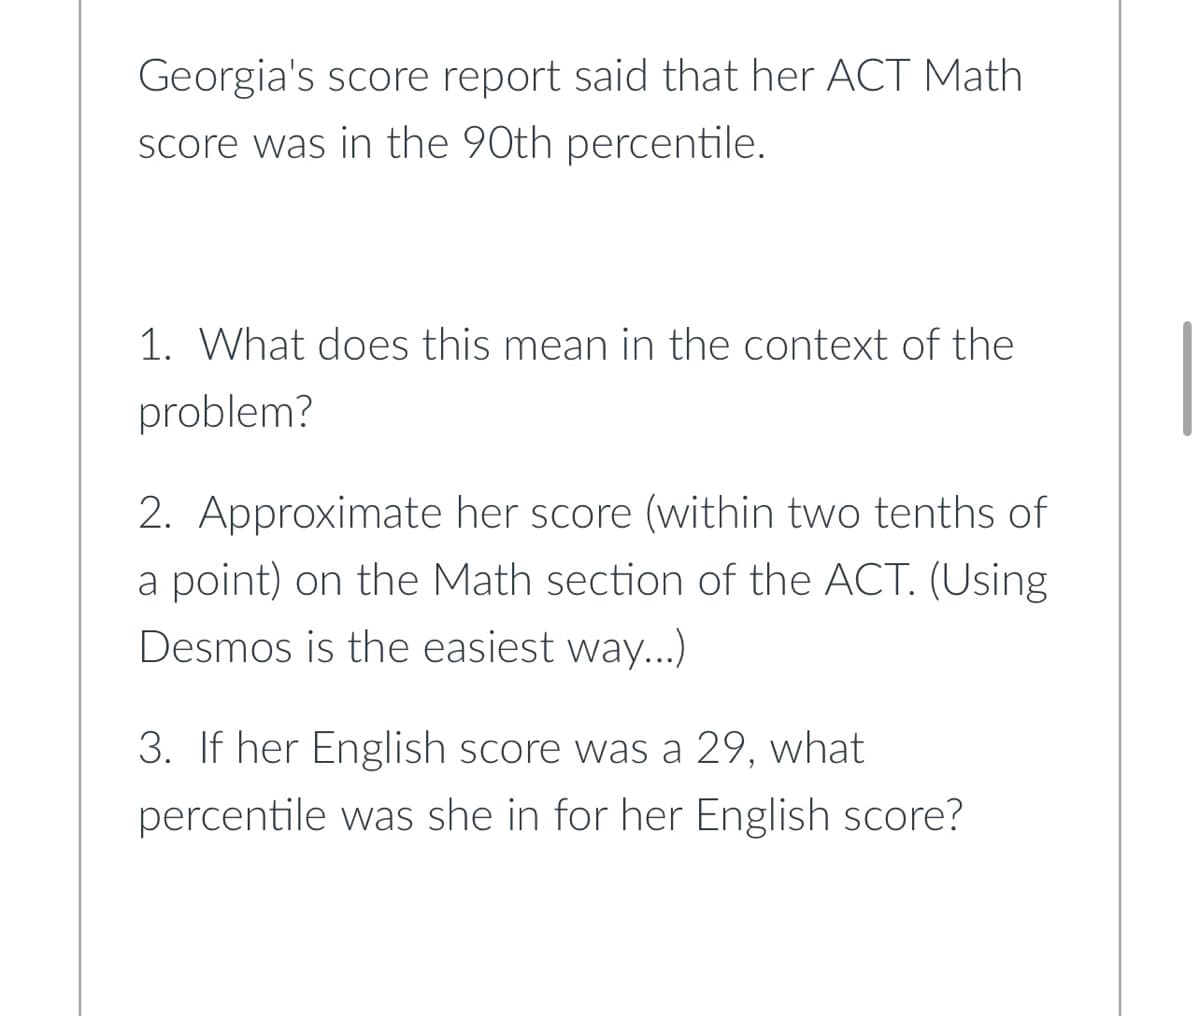 Georgia's score report said that her ACT Math
score was in the 90th percentile.
1. What does this mean in the context of the
problem?
2. Approximate her score (within two tenths of
a point) on the Math section of the ACT. (Using
Desmos is the easiest way...)
3. If her English score was a 29, what
percentile was she in for her English score?
